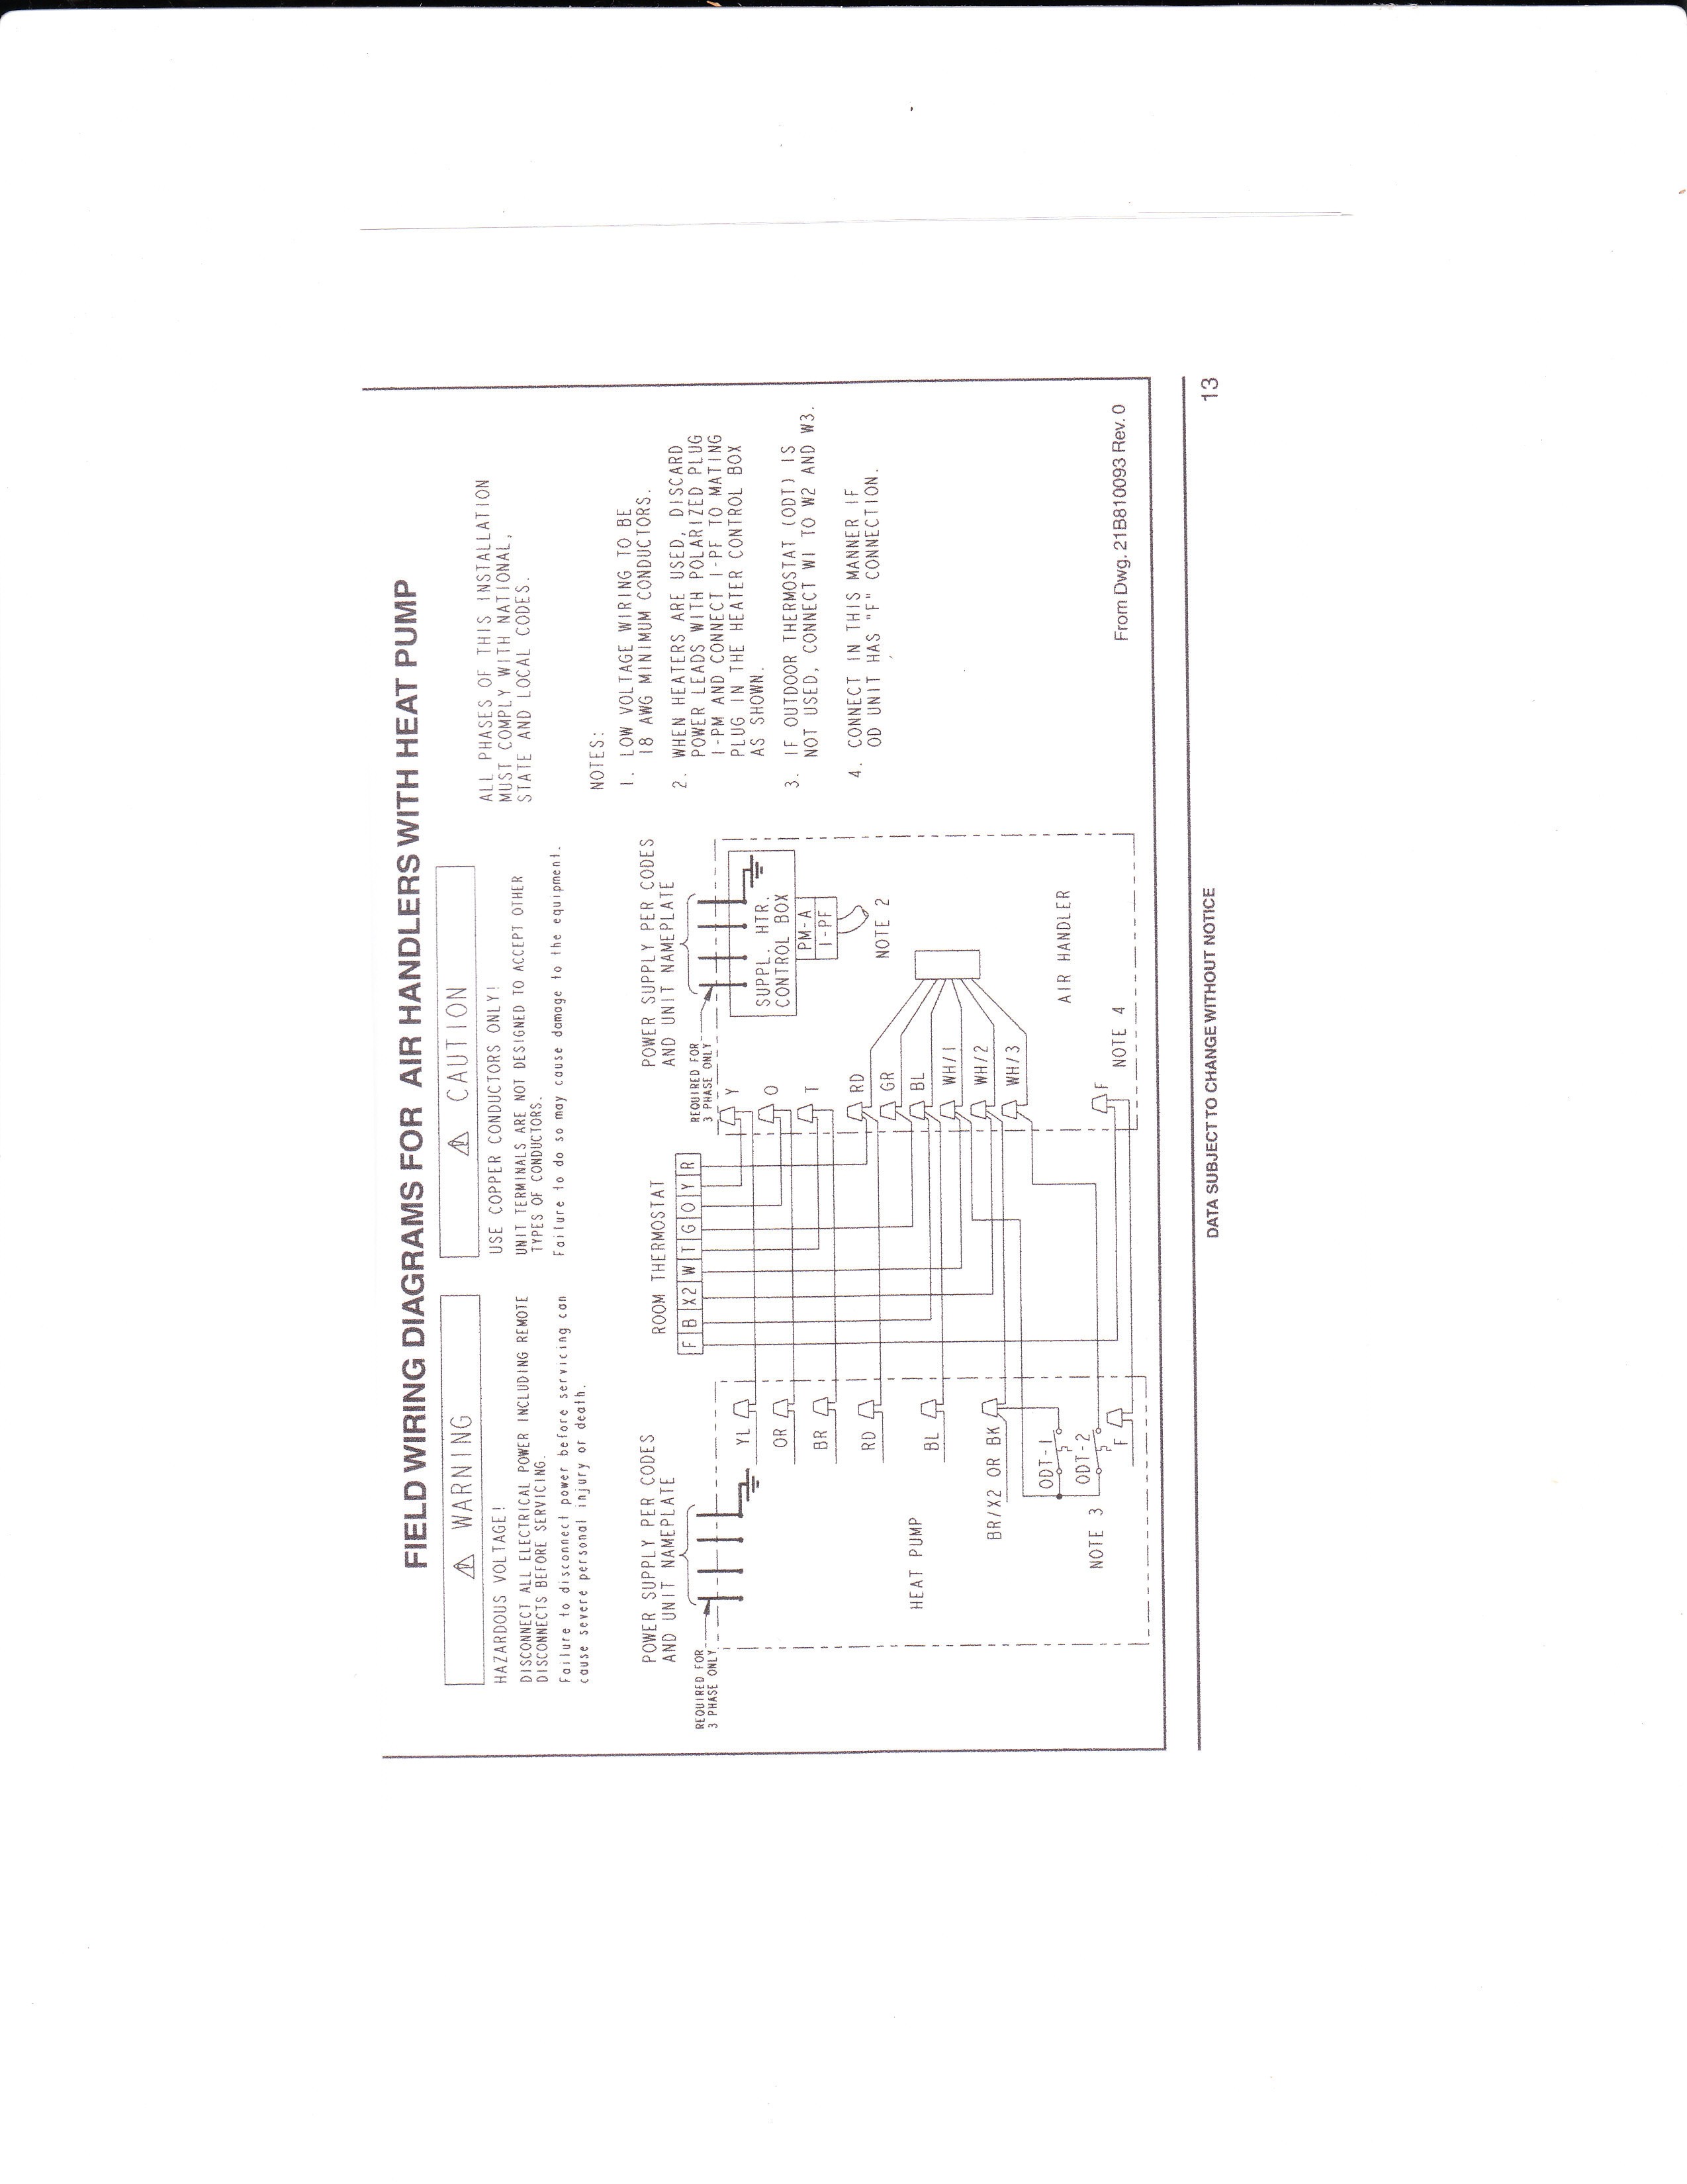 Wiring Diagram for Heating System Fresh Heating and Cooling Emerson thermostat Wiring Diagram Vehicledata Co